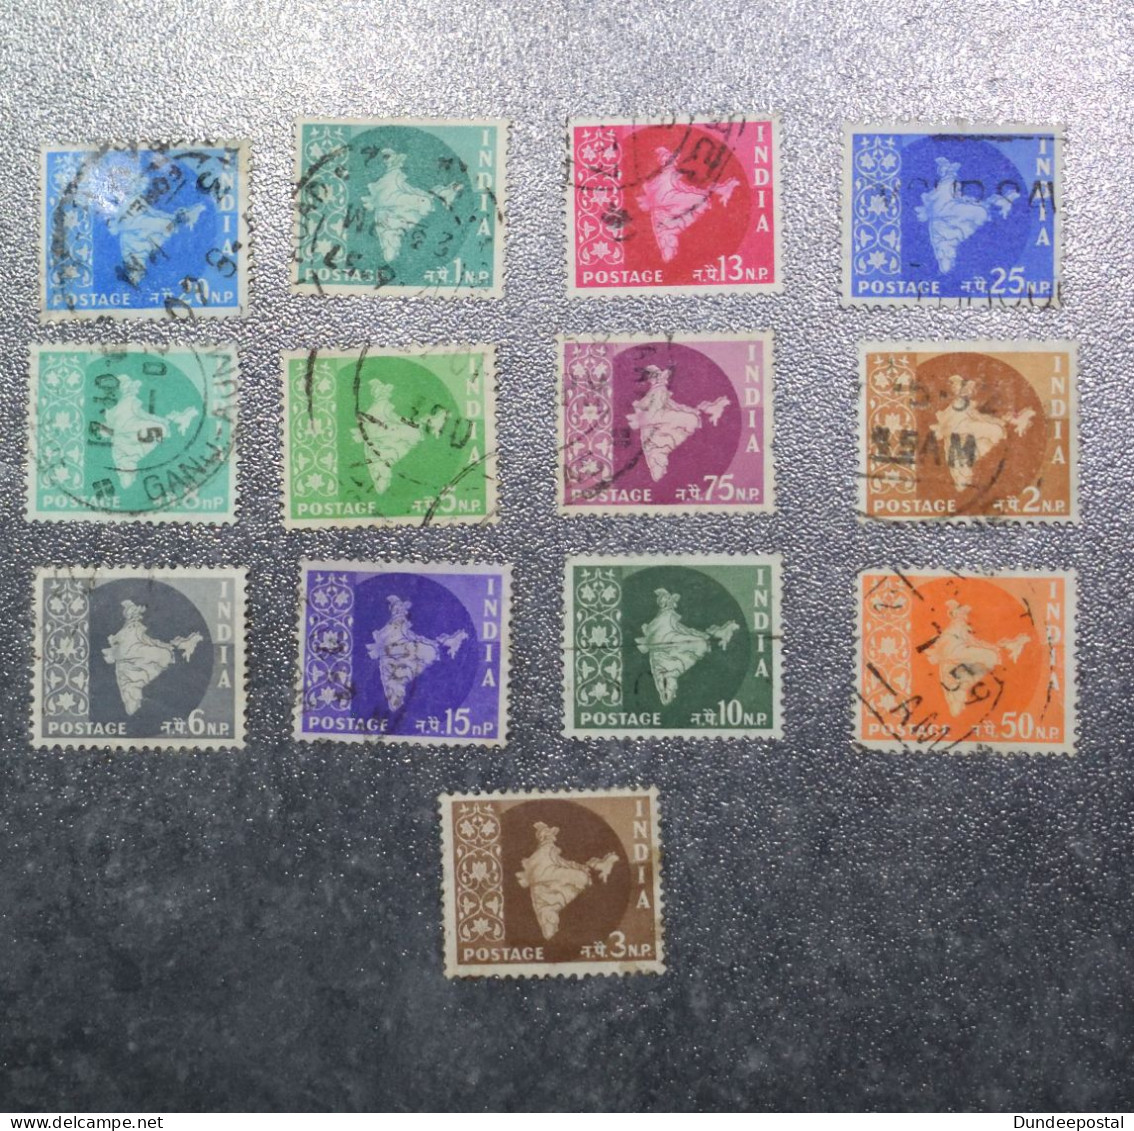 INDIA  STAMPS  Coms 1957     (N20)   ~~L@@K~~ - Gebraucht